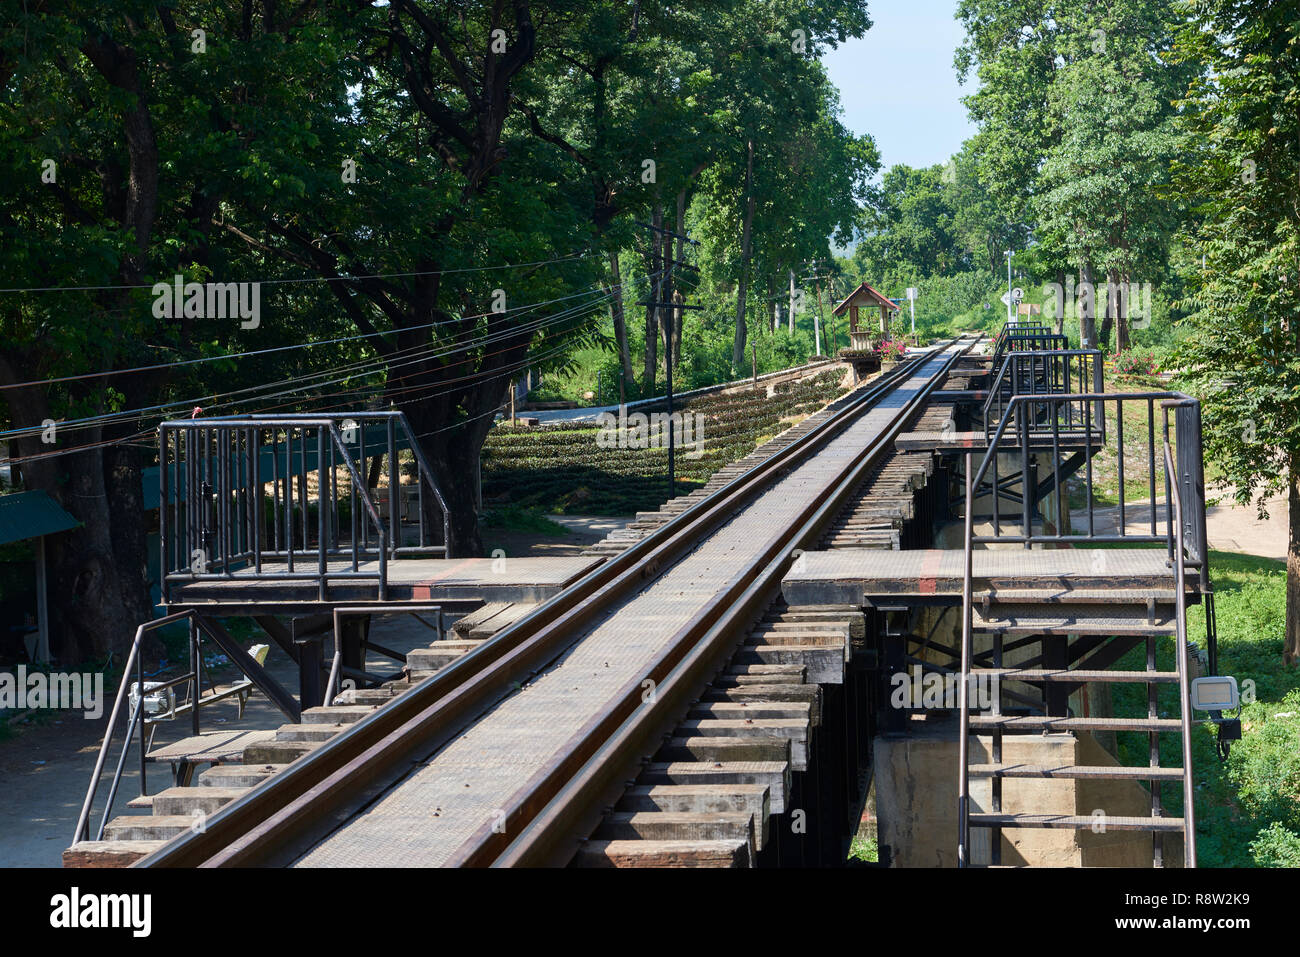 Rail tracks of the Siam-Burma Railway over River Kwai in Kanchanaburi, Thailand. The infamous bridge has become a tourist destination for the well-doc Stock Photo